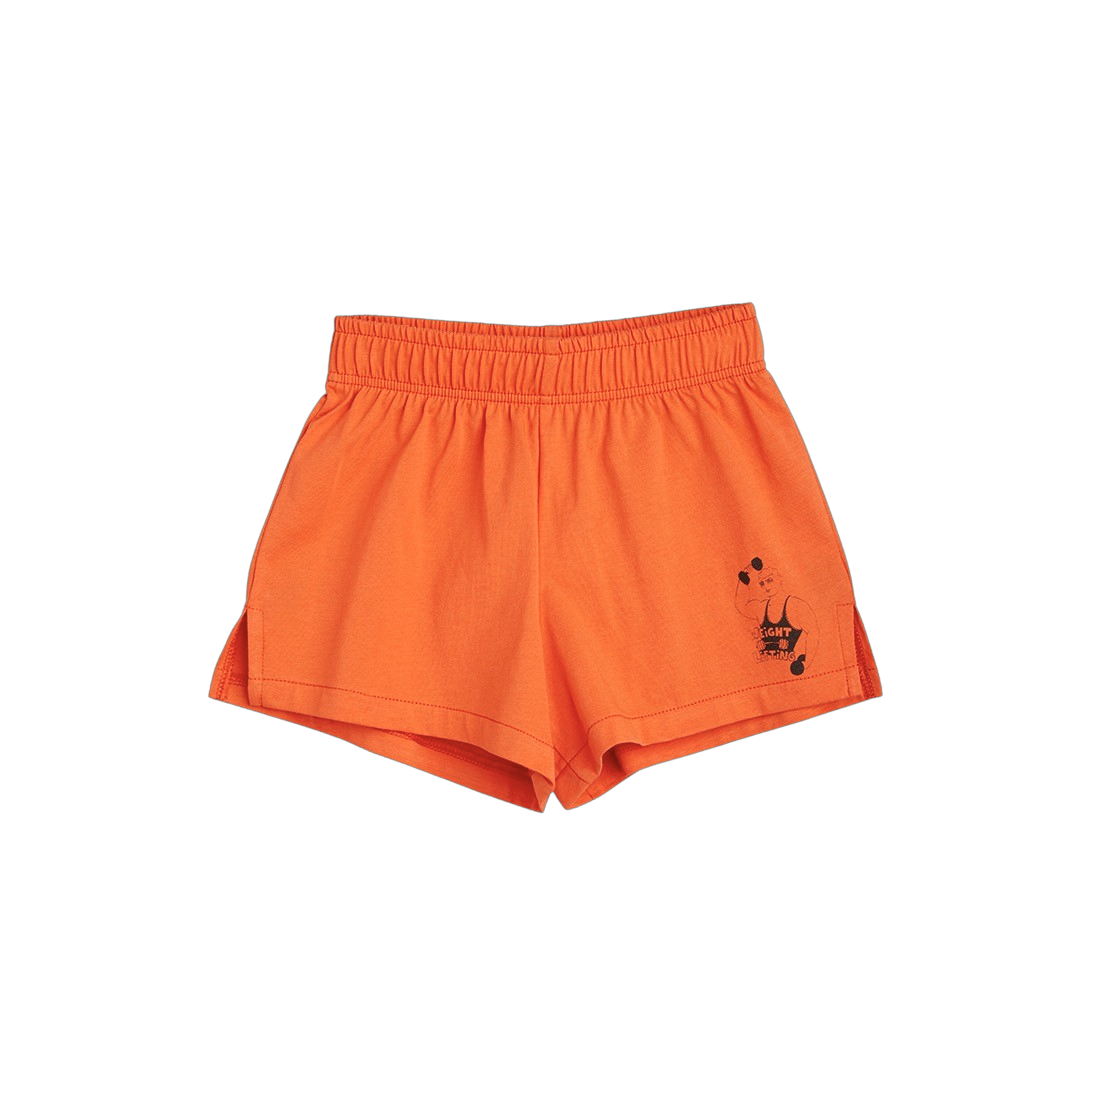 Weight lifting sp shorts